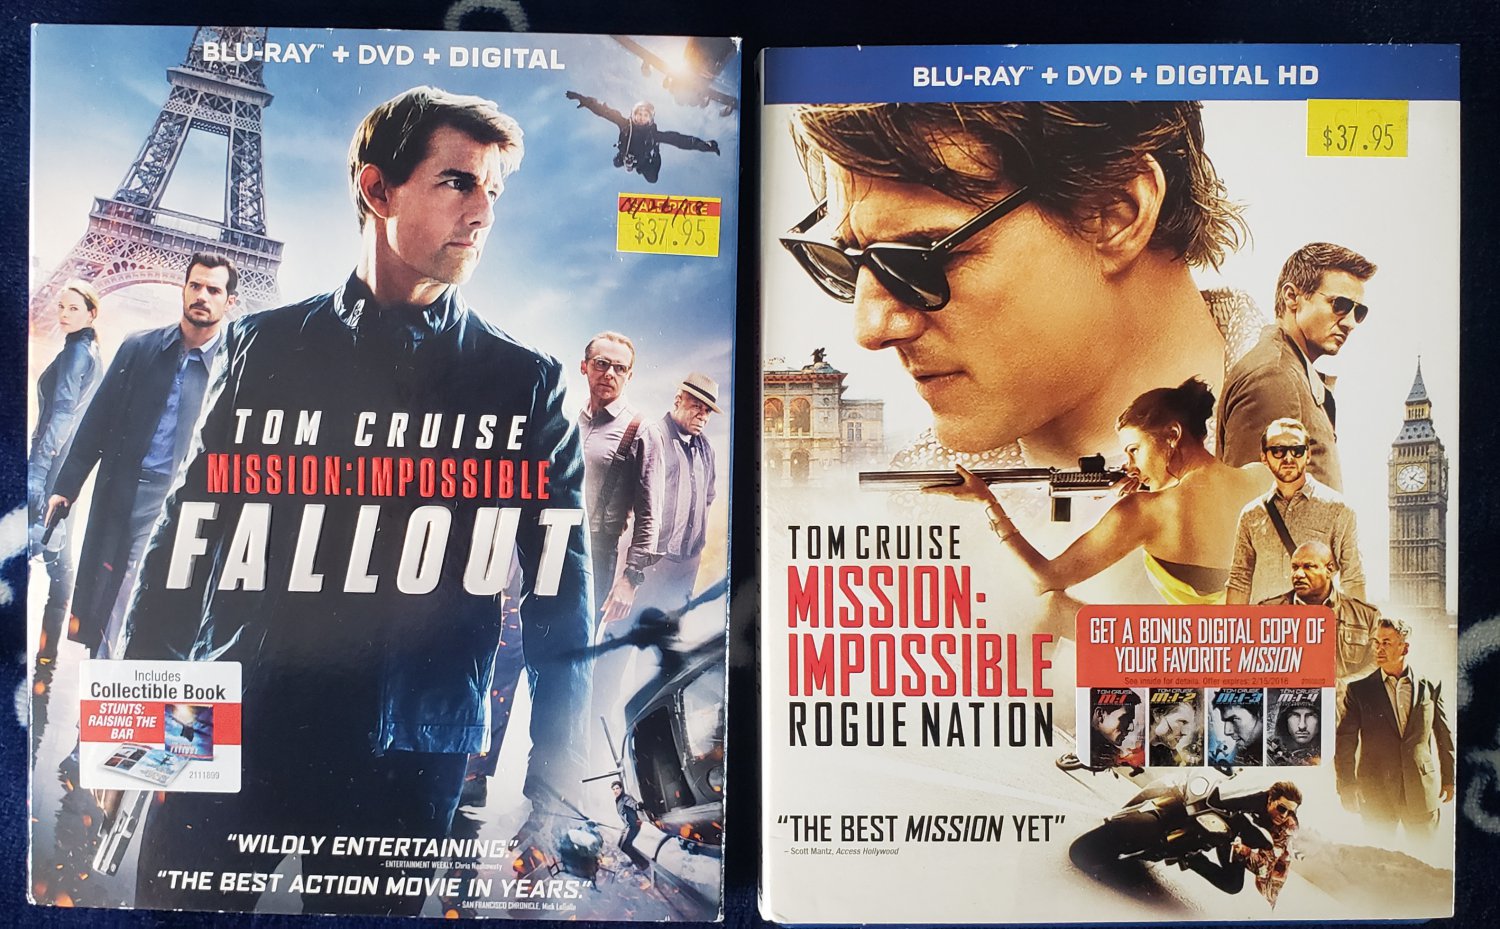 LOT OF 2 MISSION IMPOSSIBLE ROGUE NATION+FALLOUT BLU-RAYs TOM CRUISE